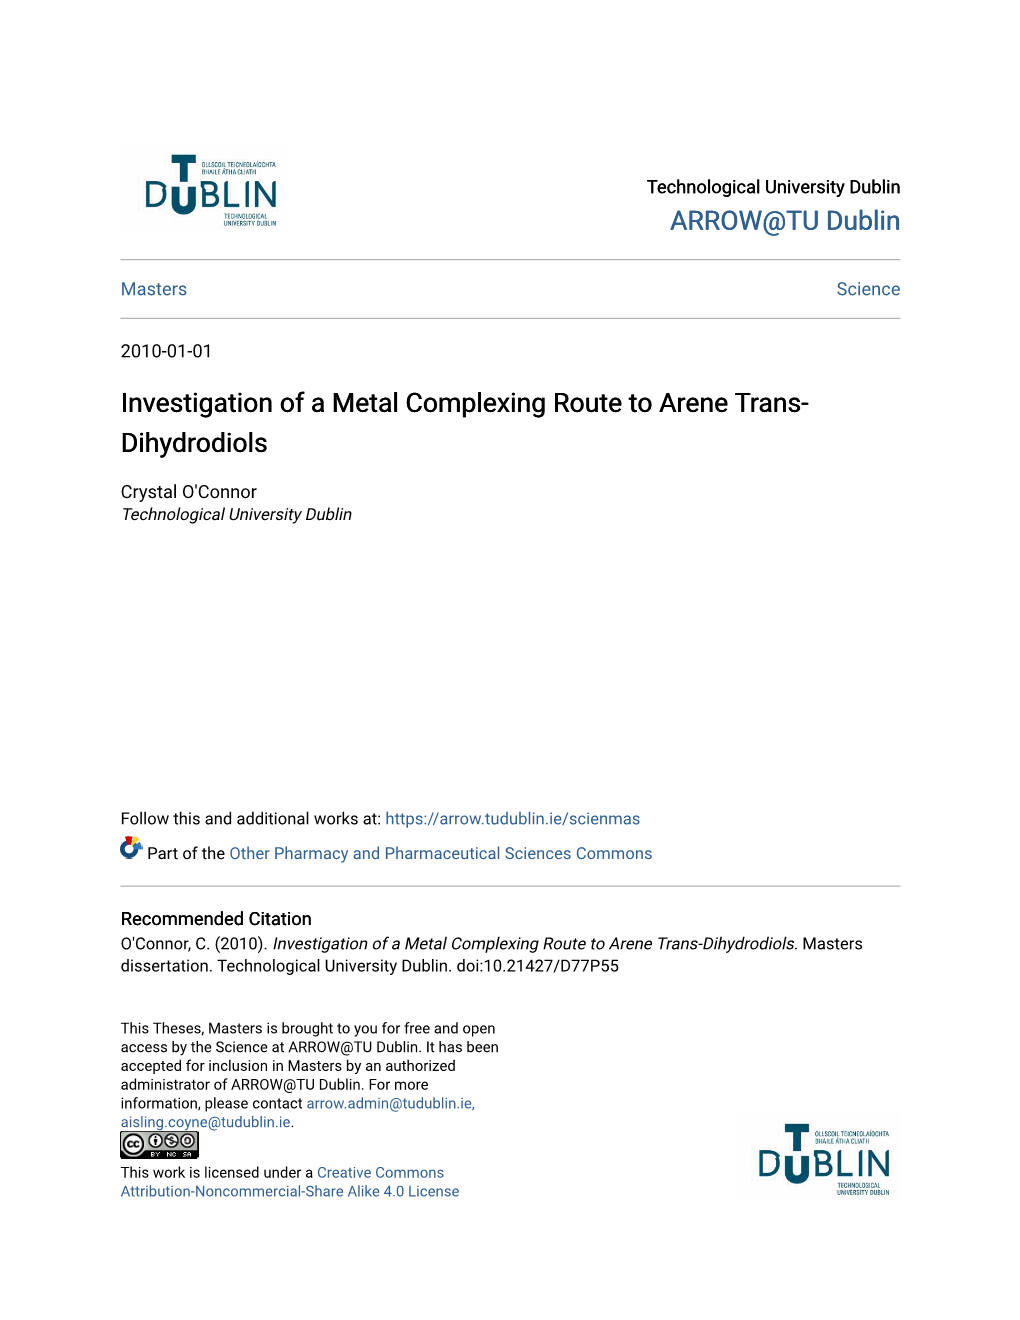 Investigation of a Metal Complexing Route to Arene Trans-Dihydrodiols